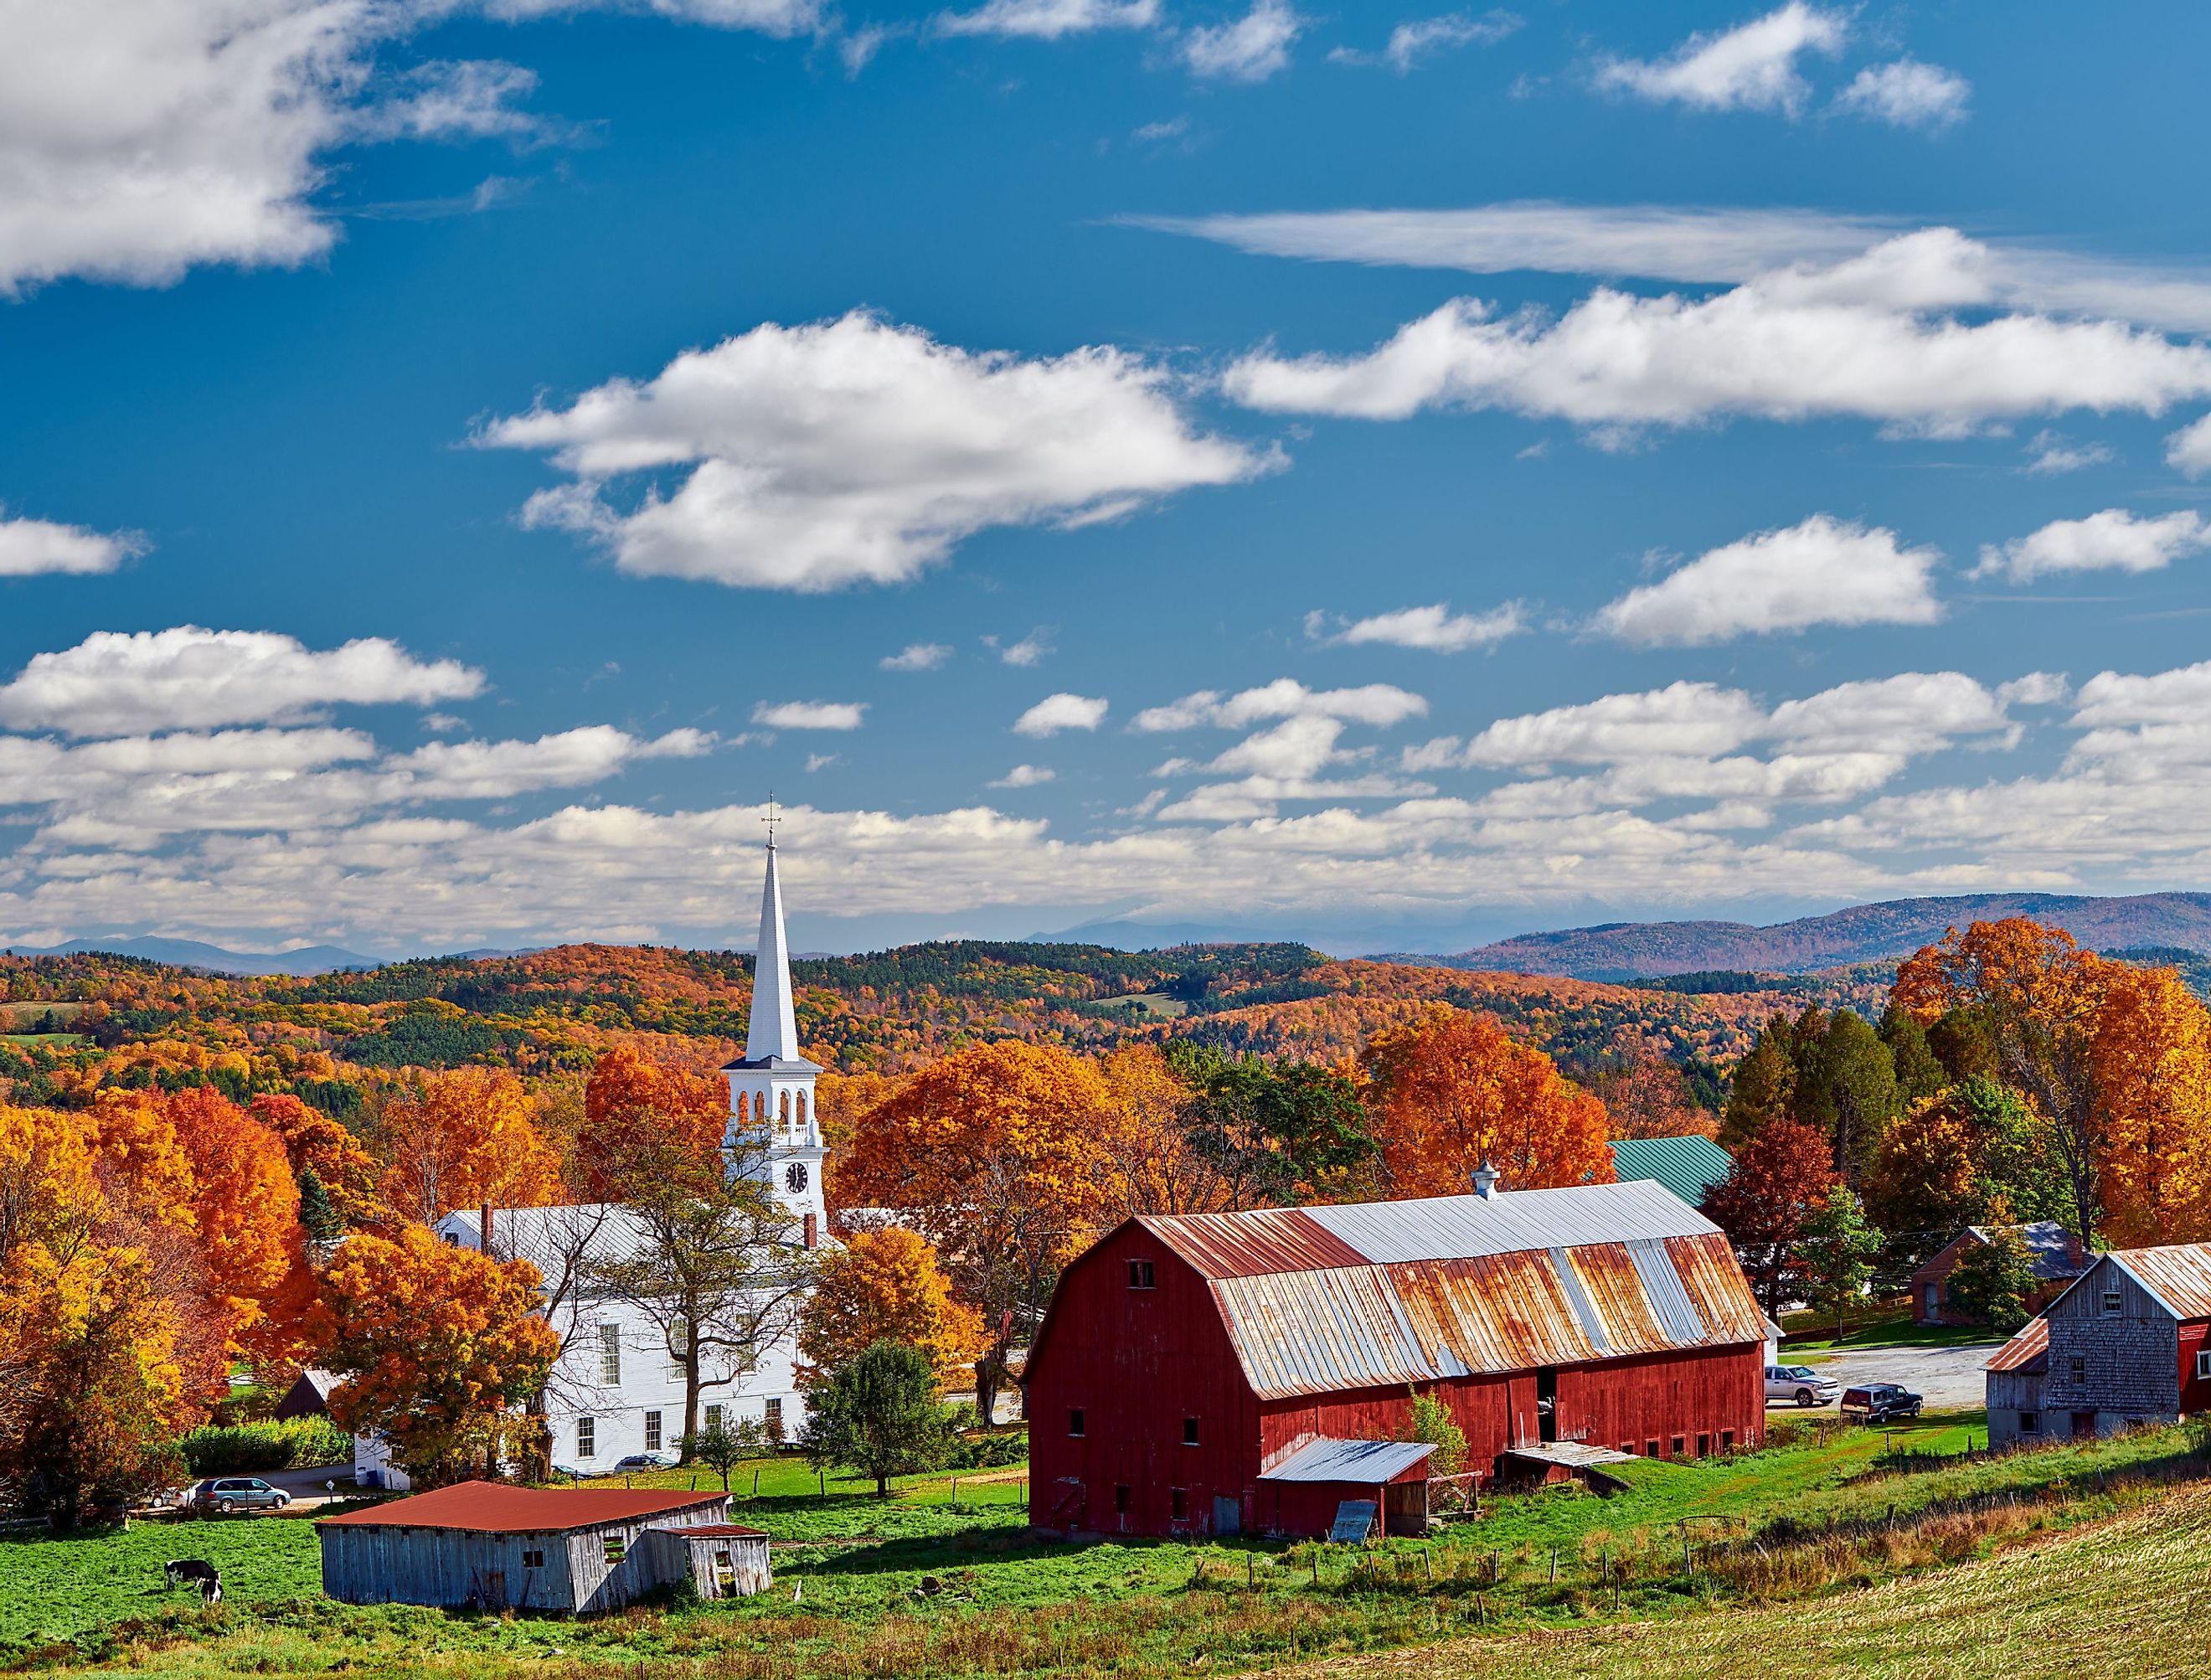 Church and farm in Vermont. Image credit haveseen via shutterstock